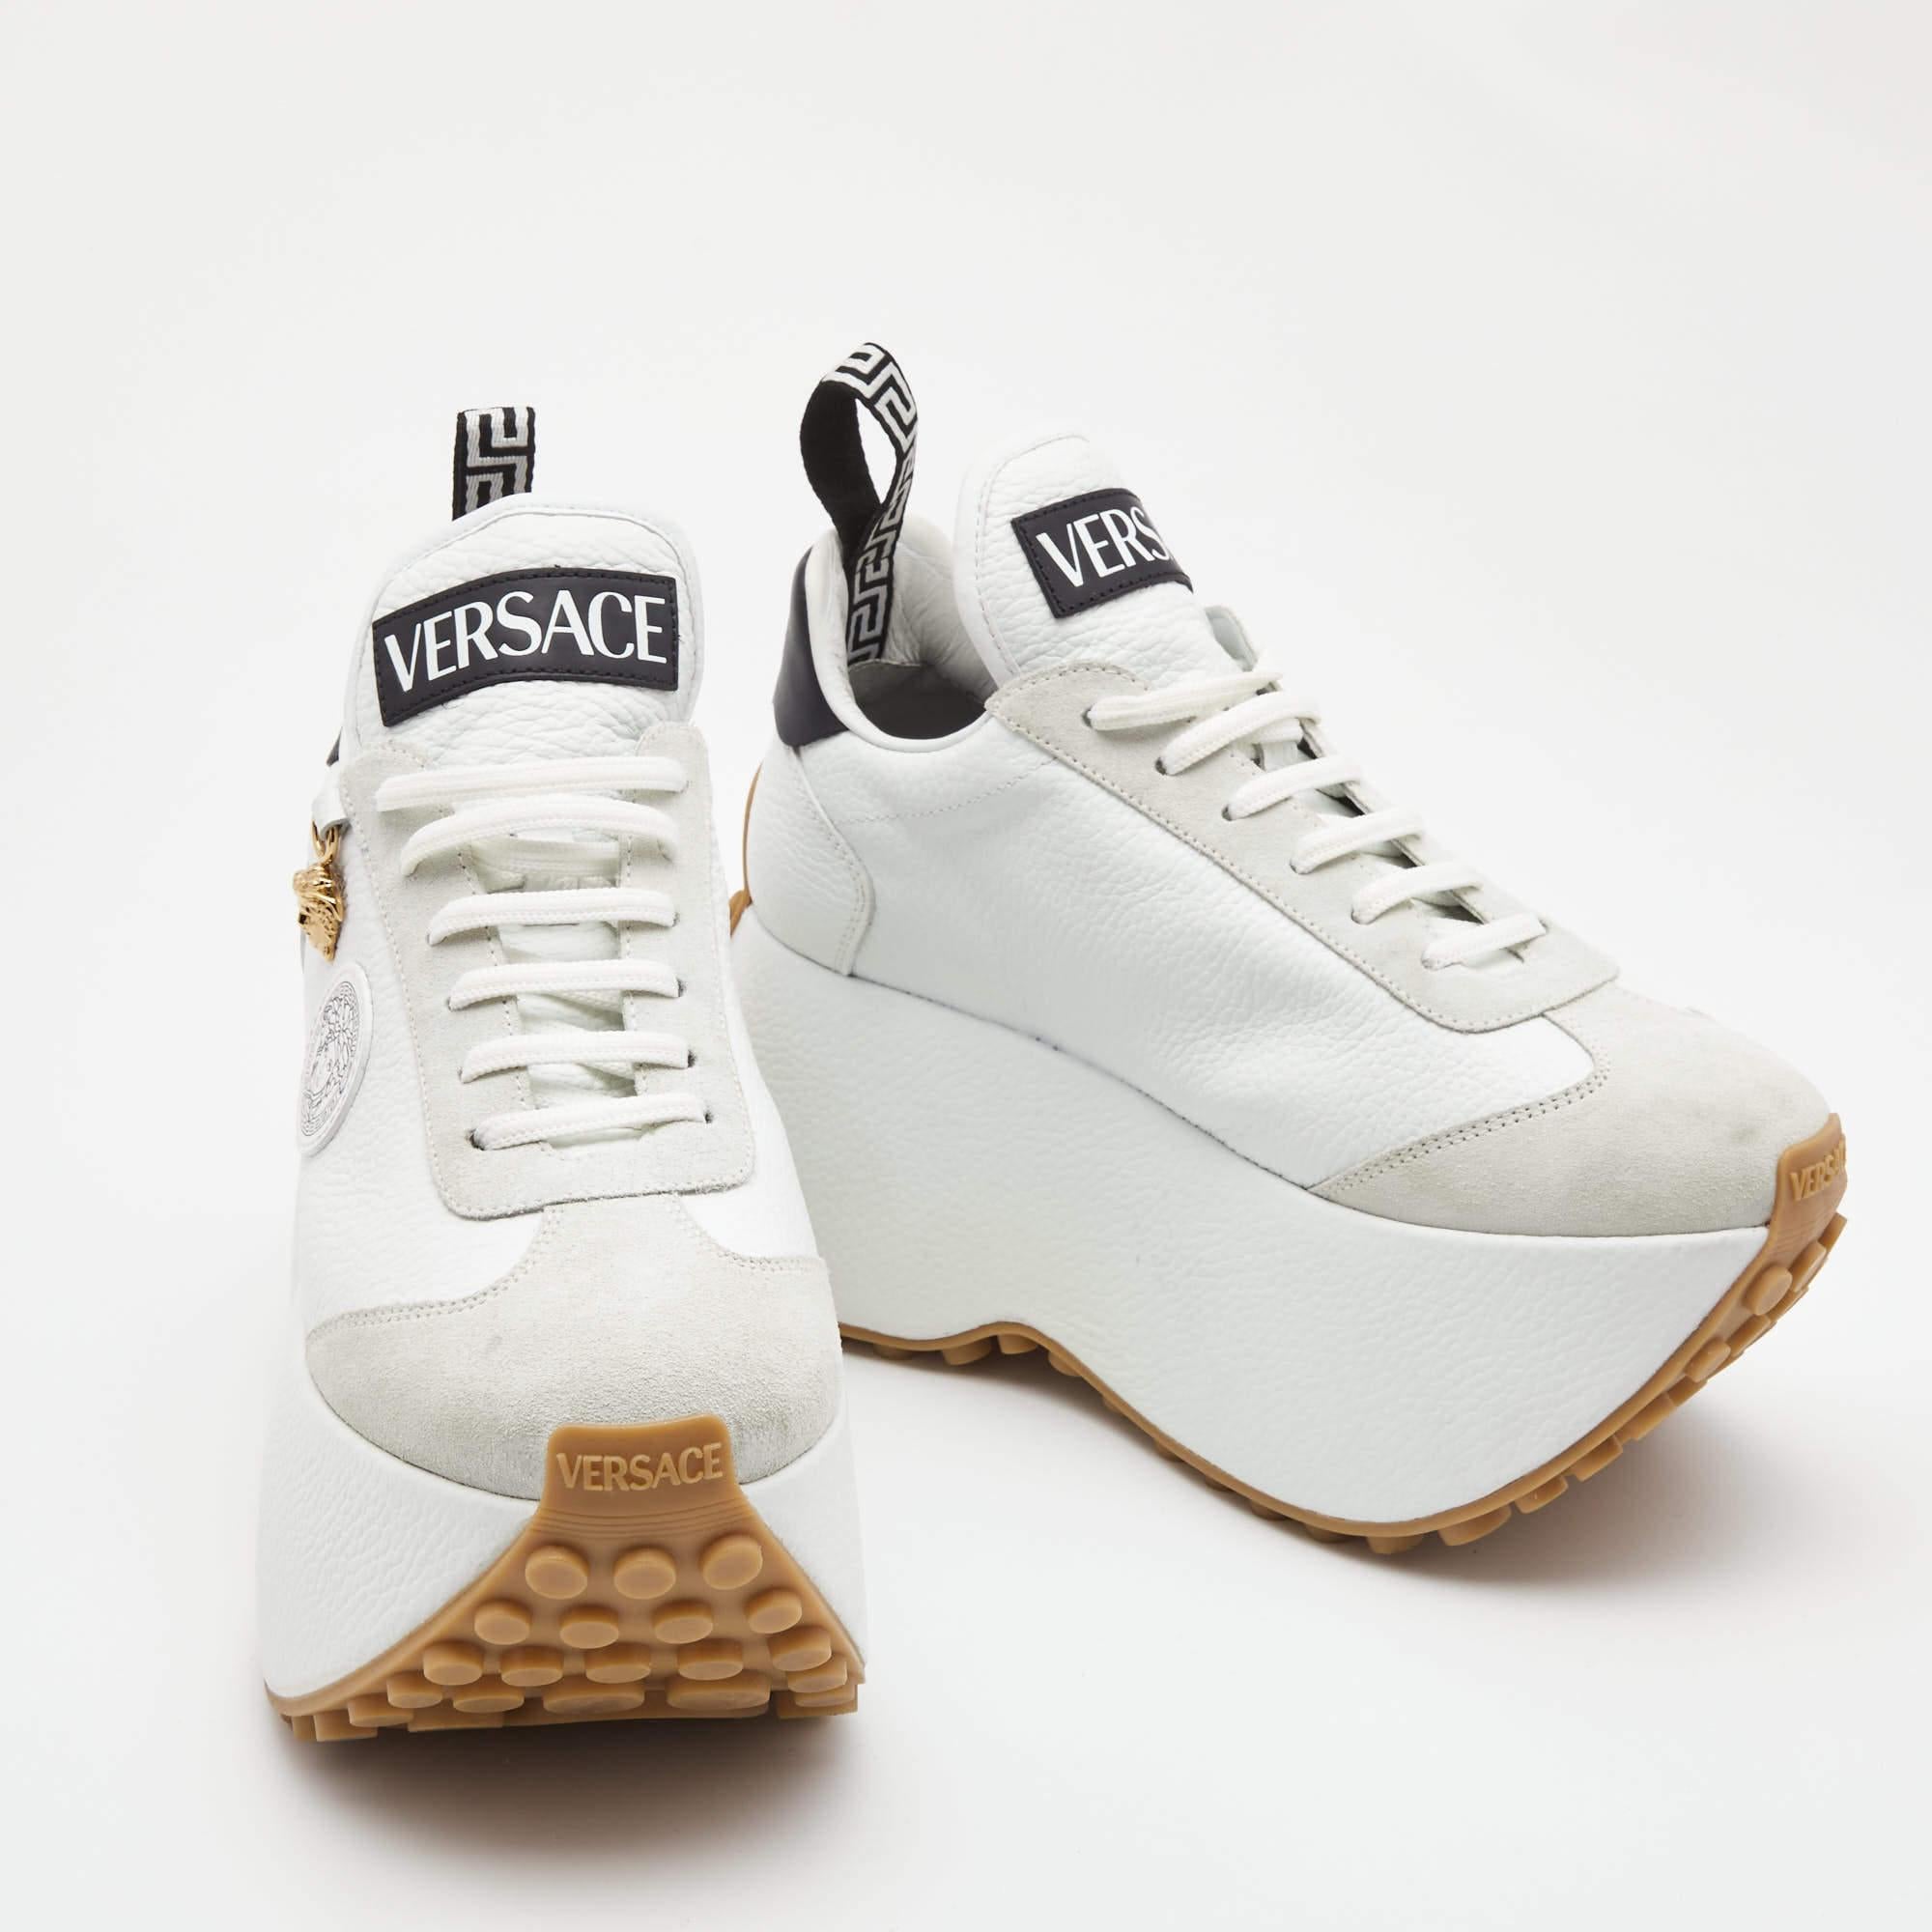 Versace White Leather and Suede Medusa Charm Detail Platform Sneakers Size 37.5 1